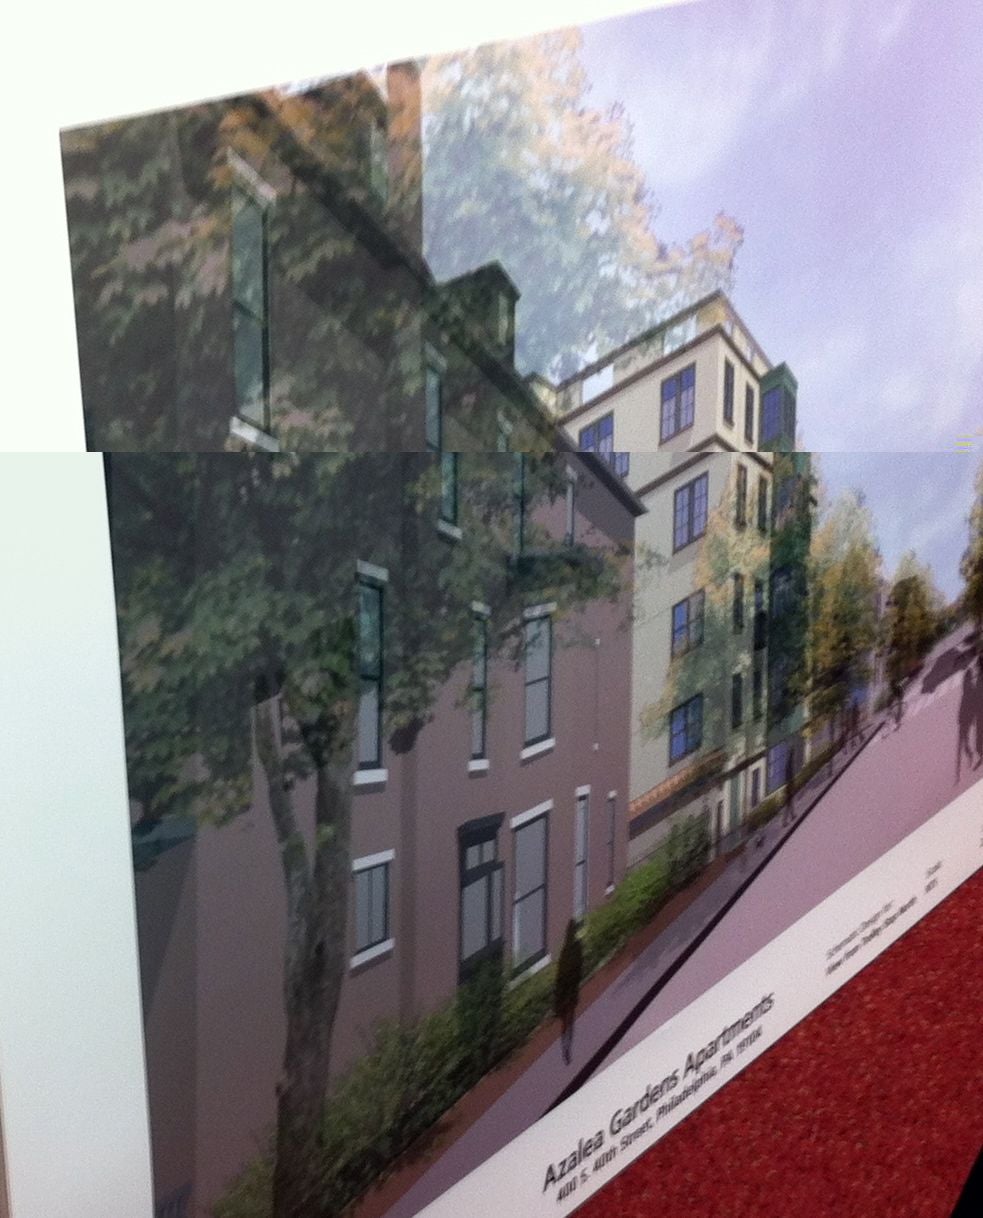 Proposed apartment building at 400 S. 40th Street